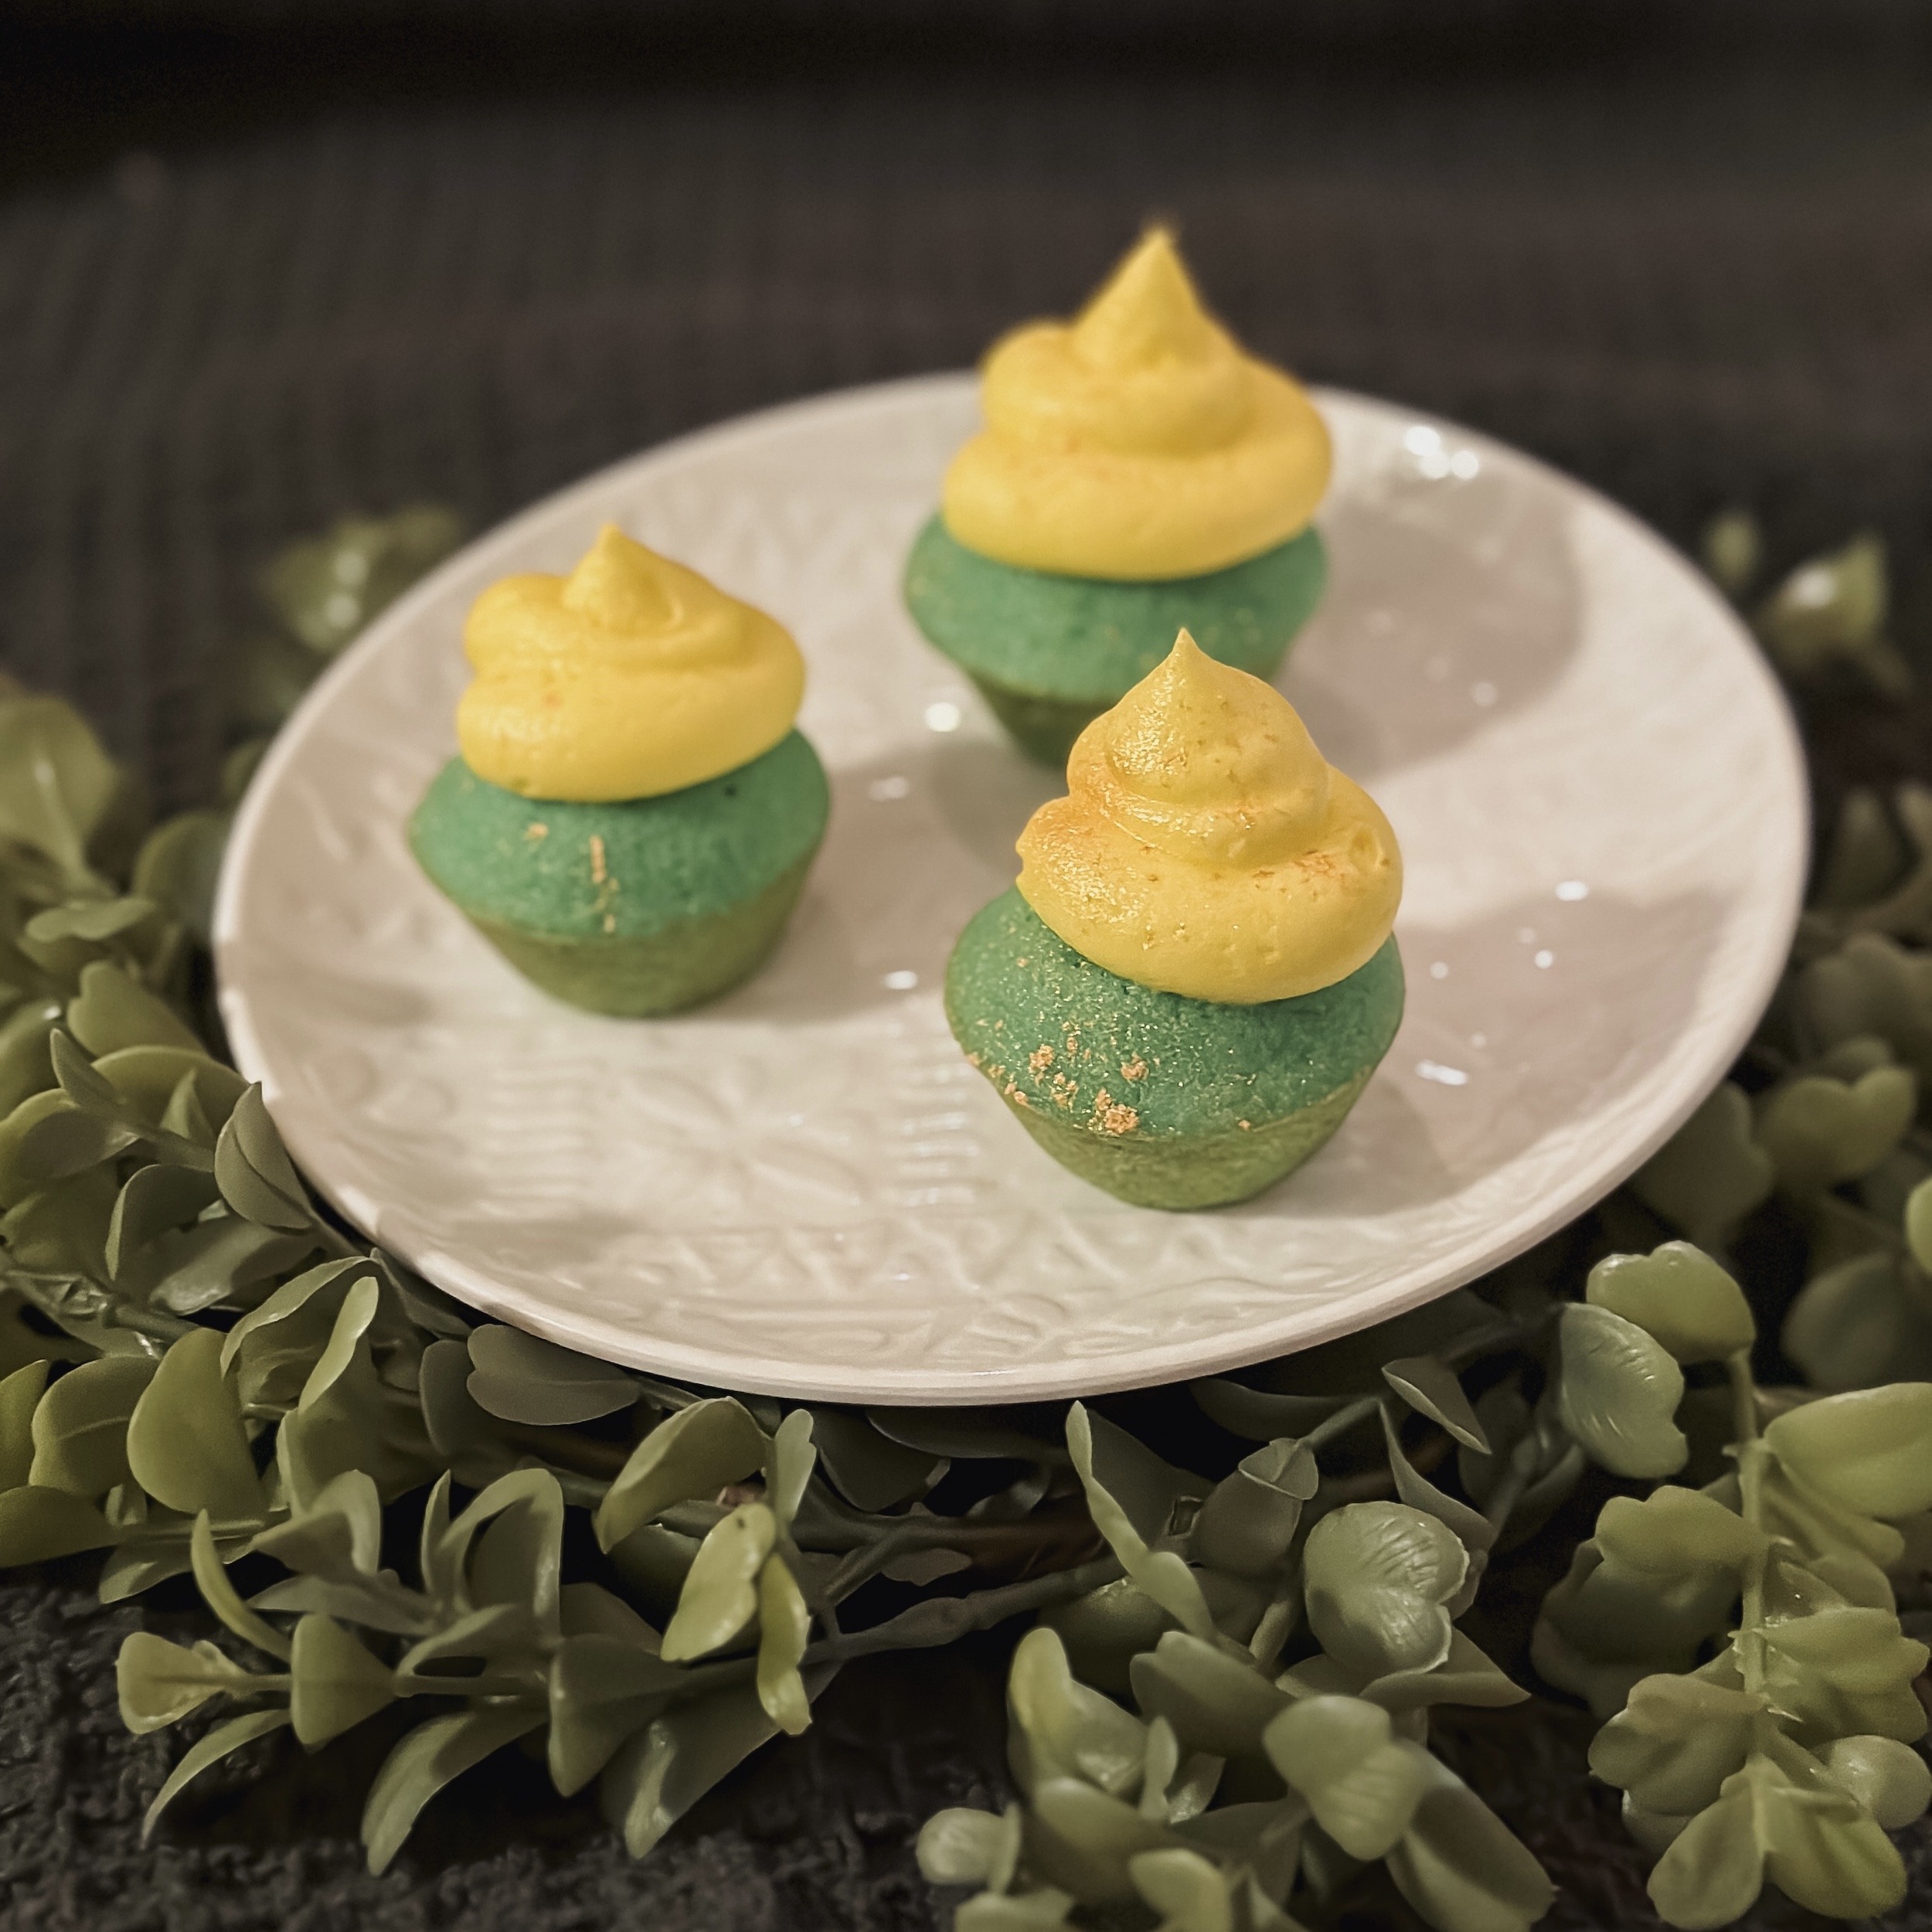 Tinkerbell Cupcakes (mini green vanilla cupcakes with yellow lemon frosting and edible gold dust)